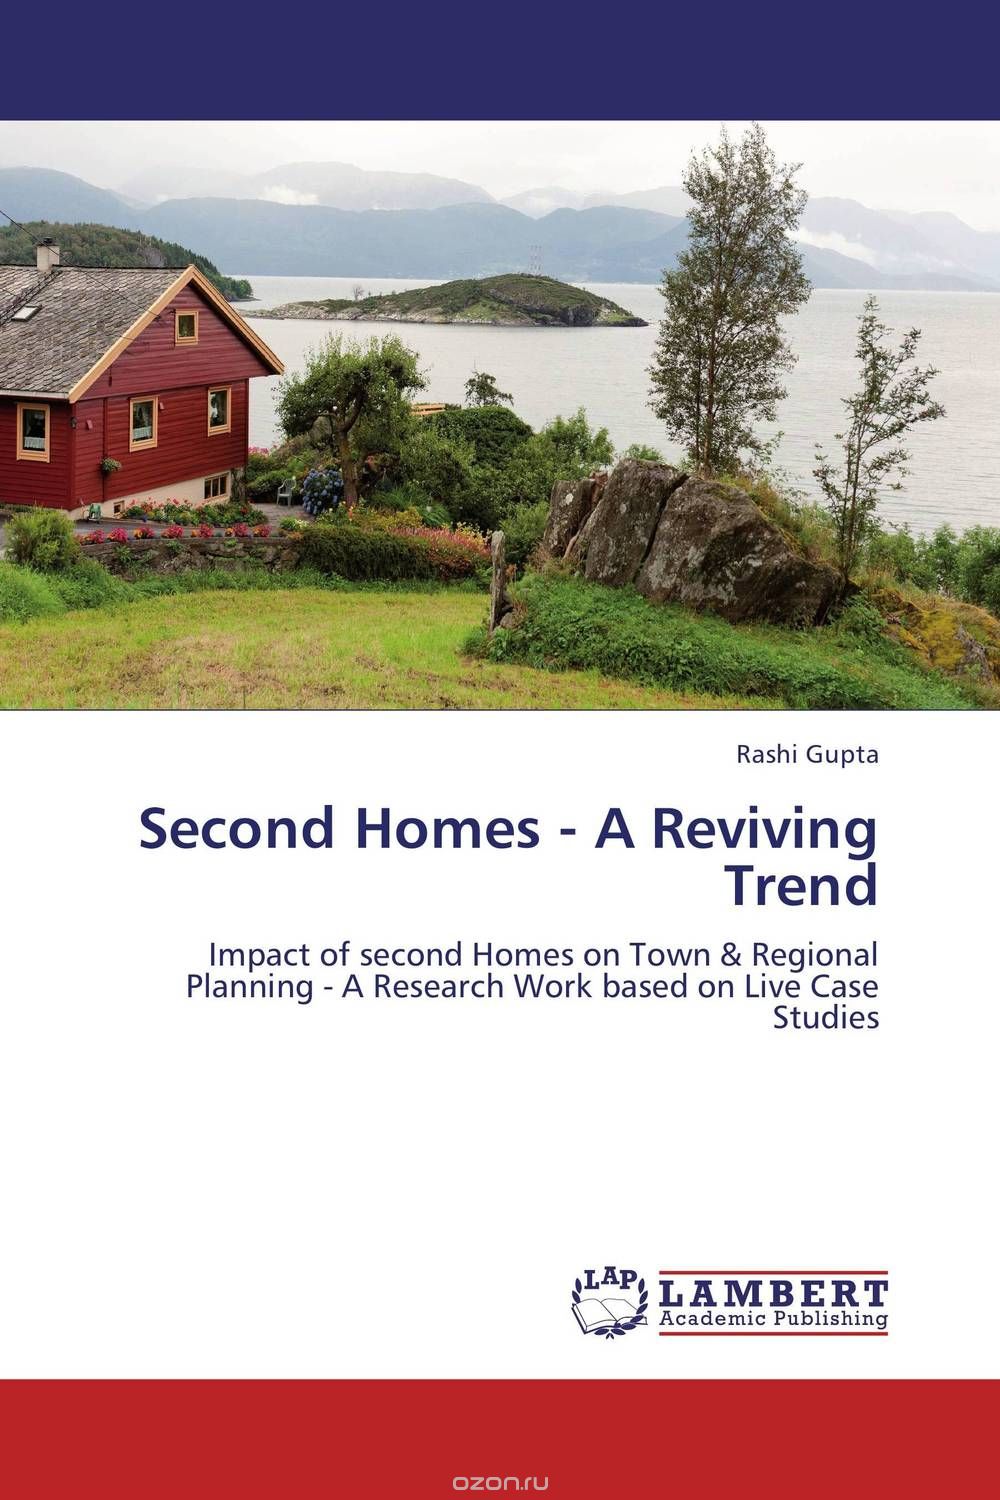 Second Homes - A Reviving Trend